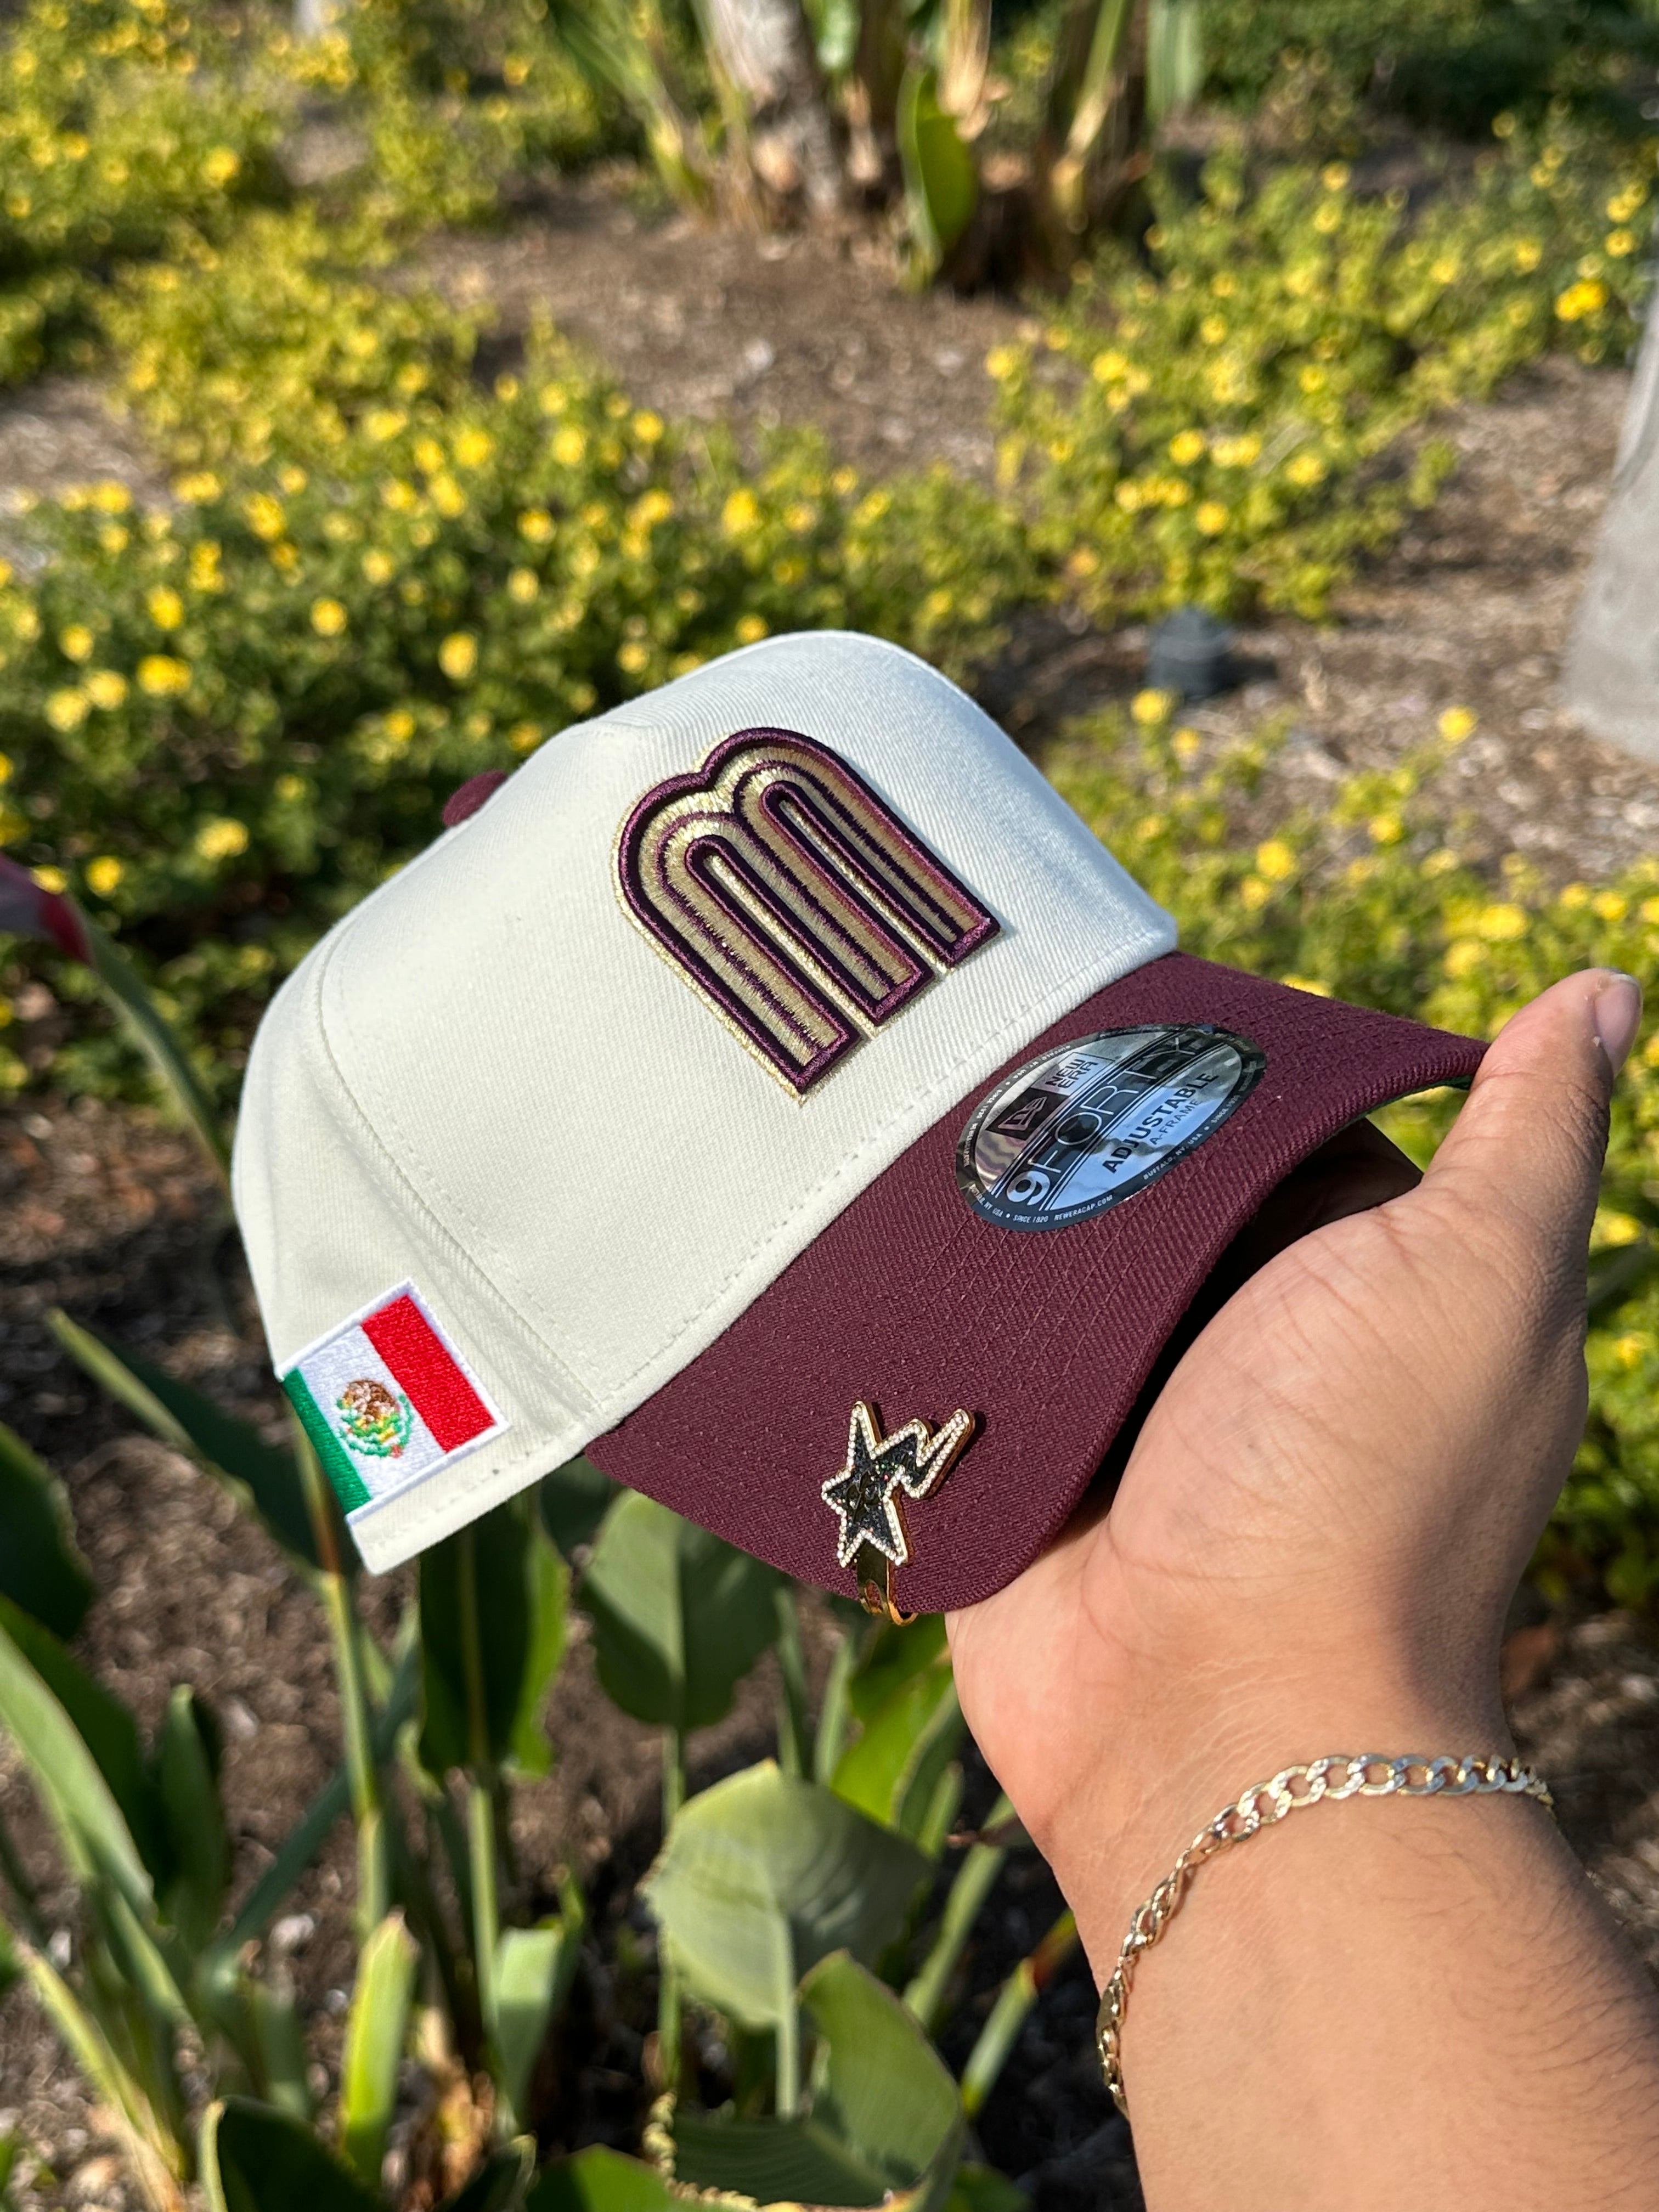 NEW ERA EXCLUSIVE 9FORTY CHROME WHITE/BURGUNDY MEXICO A-FRAME ADJUSTABLE W/ MEXICO FLAG SIDE PATCH